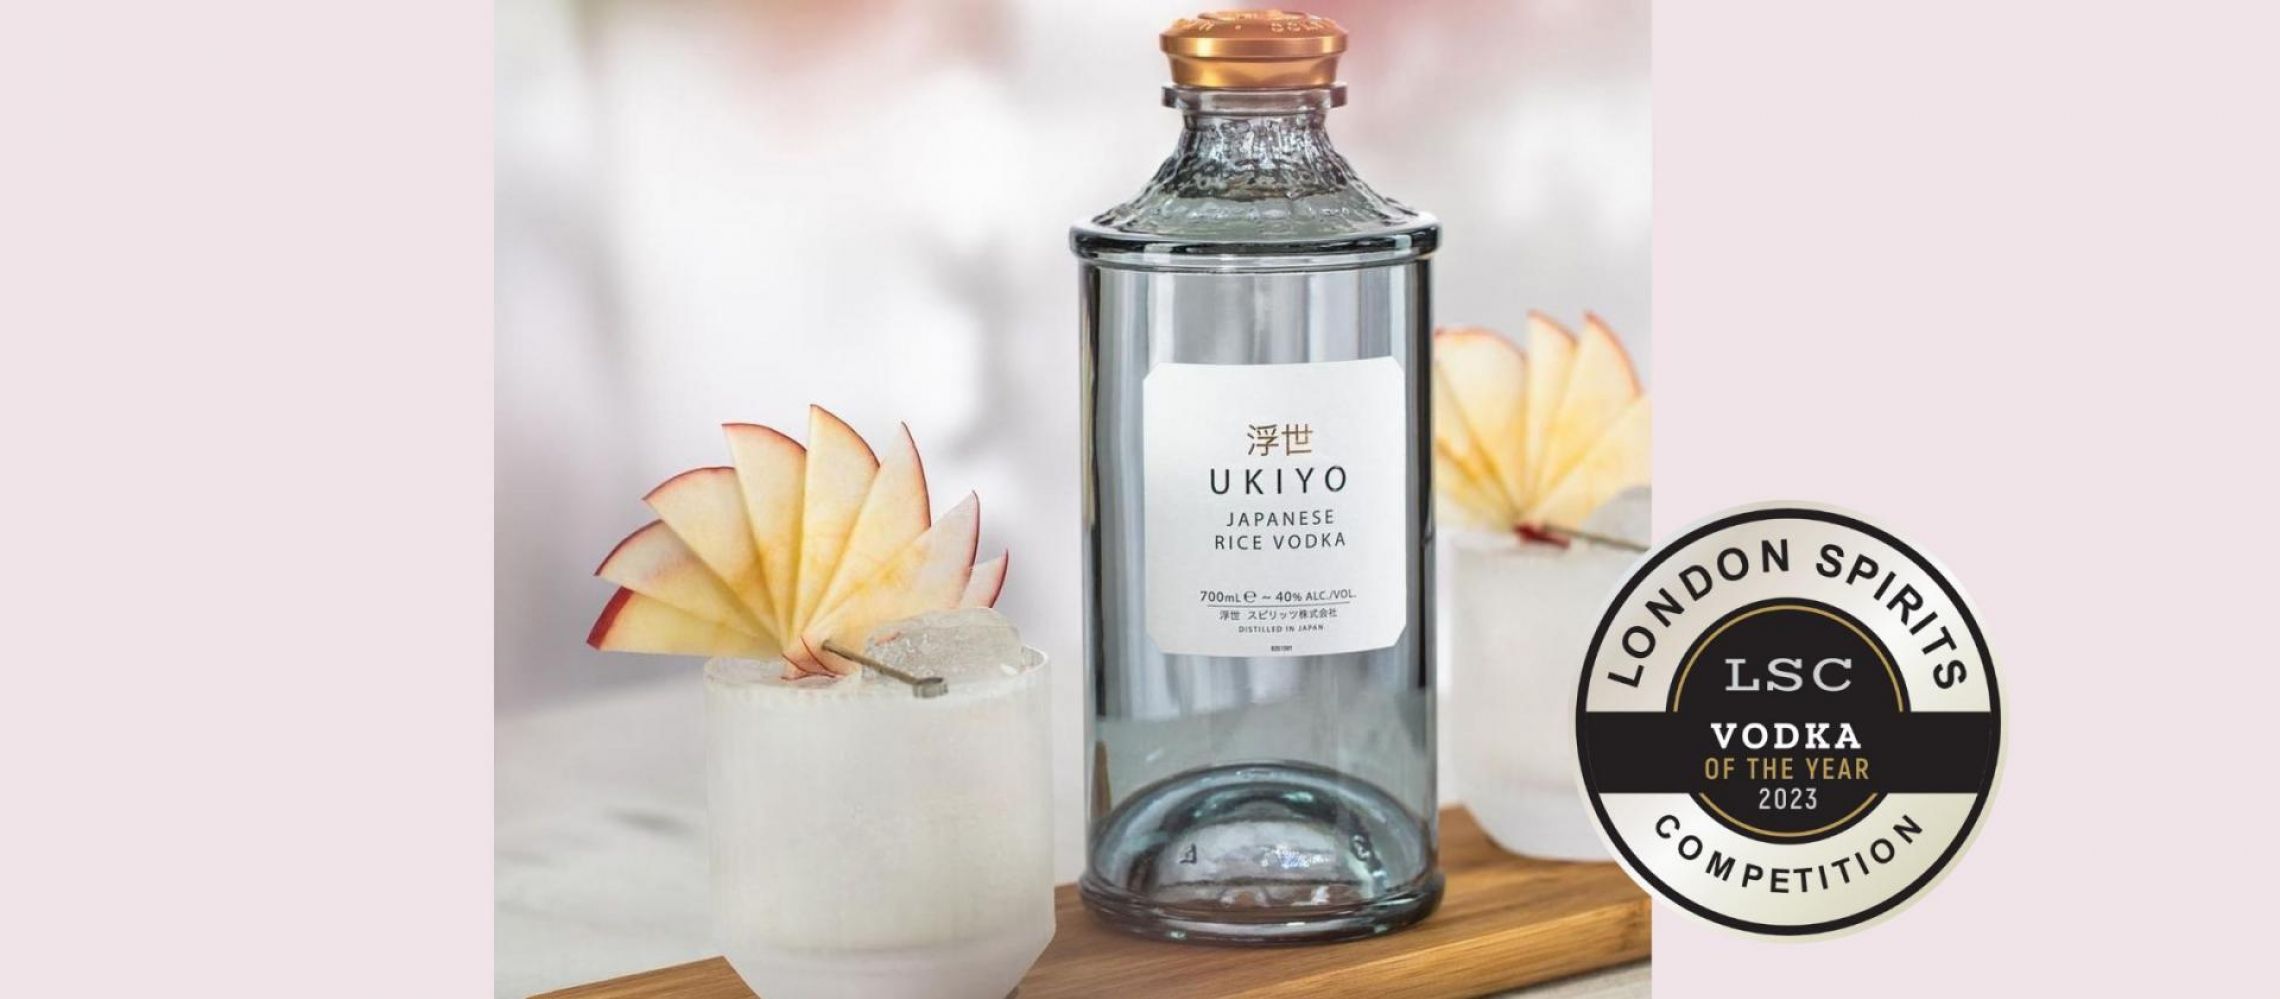 Photo for: Japan Wins The Best Tasting Vodka at London Spirits Competition